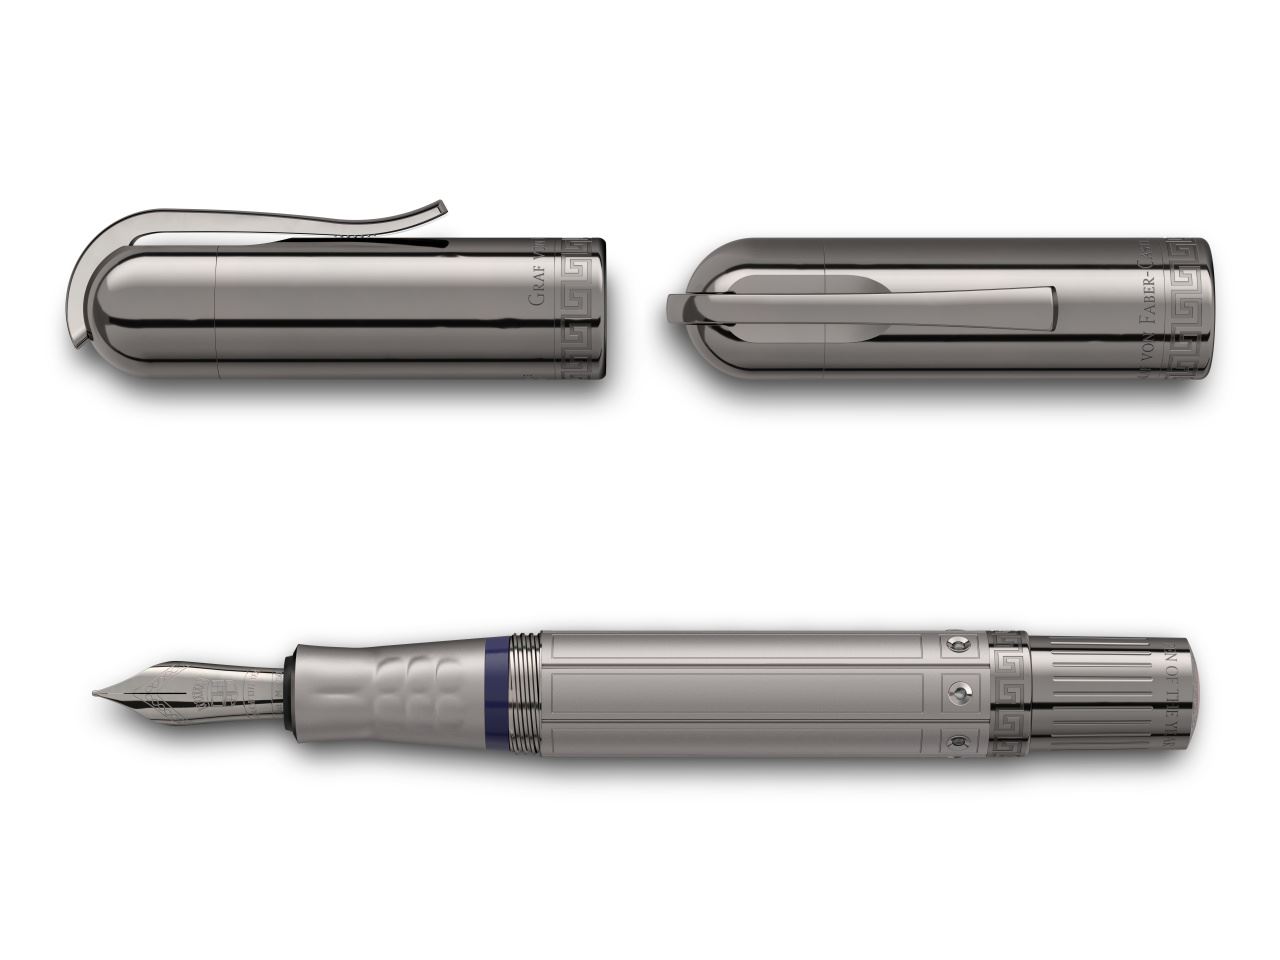 Graf-von-Faber-Castell - Fountain pen Pen of the Year 2020 Ruthenium, Extra Broad